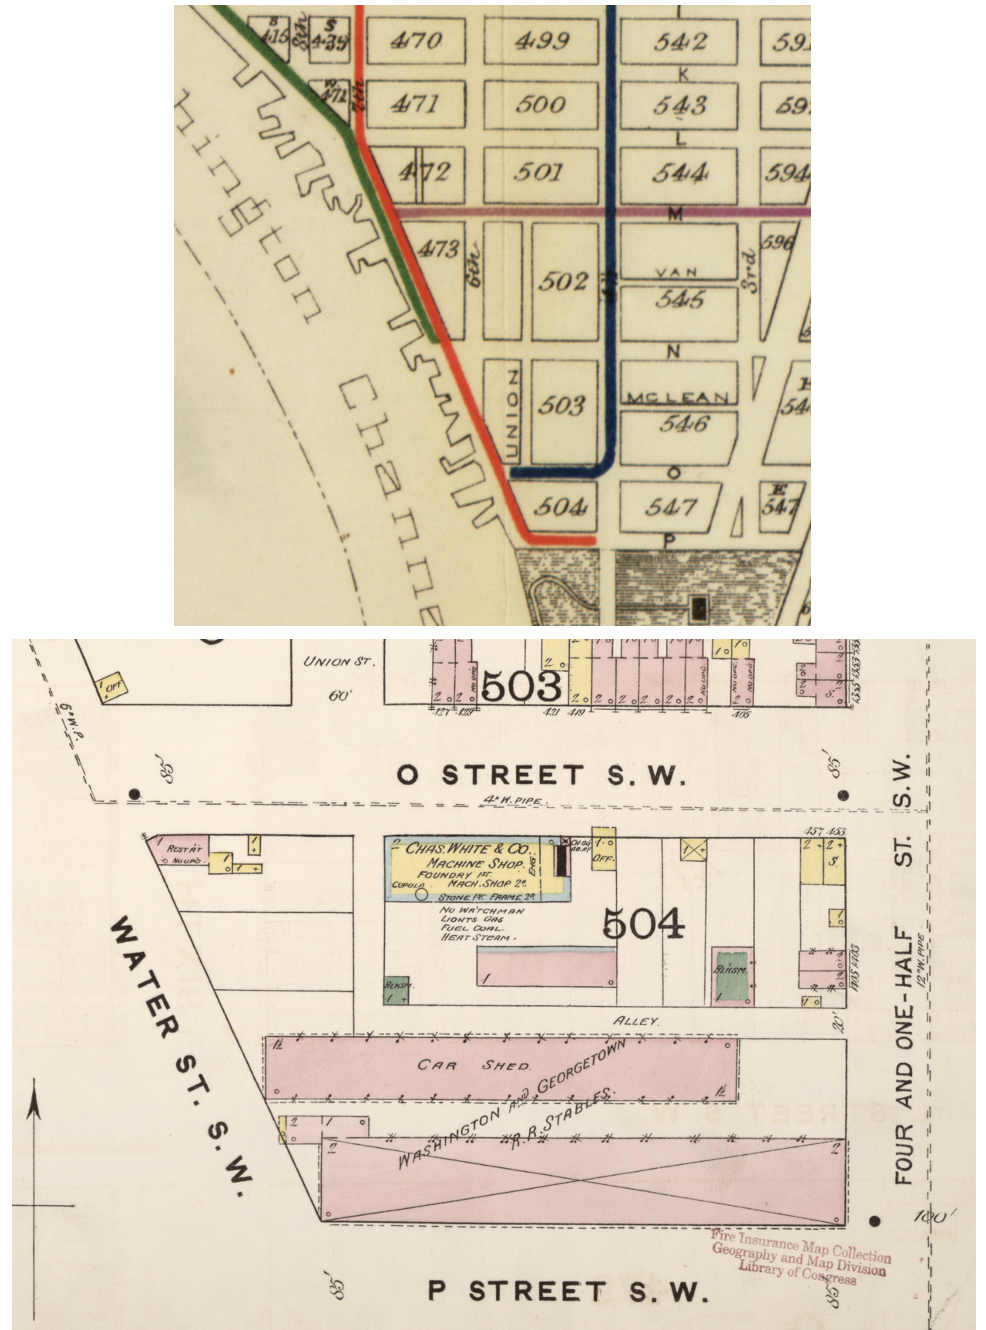   The Washington and Georgetown Railroad (red) extended their 7th Street line along Water Street SW and built a car barn and stable at P street SW circa 1870, which served as the southern terminus of the line. (Excerpts from Lusk, “Statistical Map. N